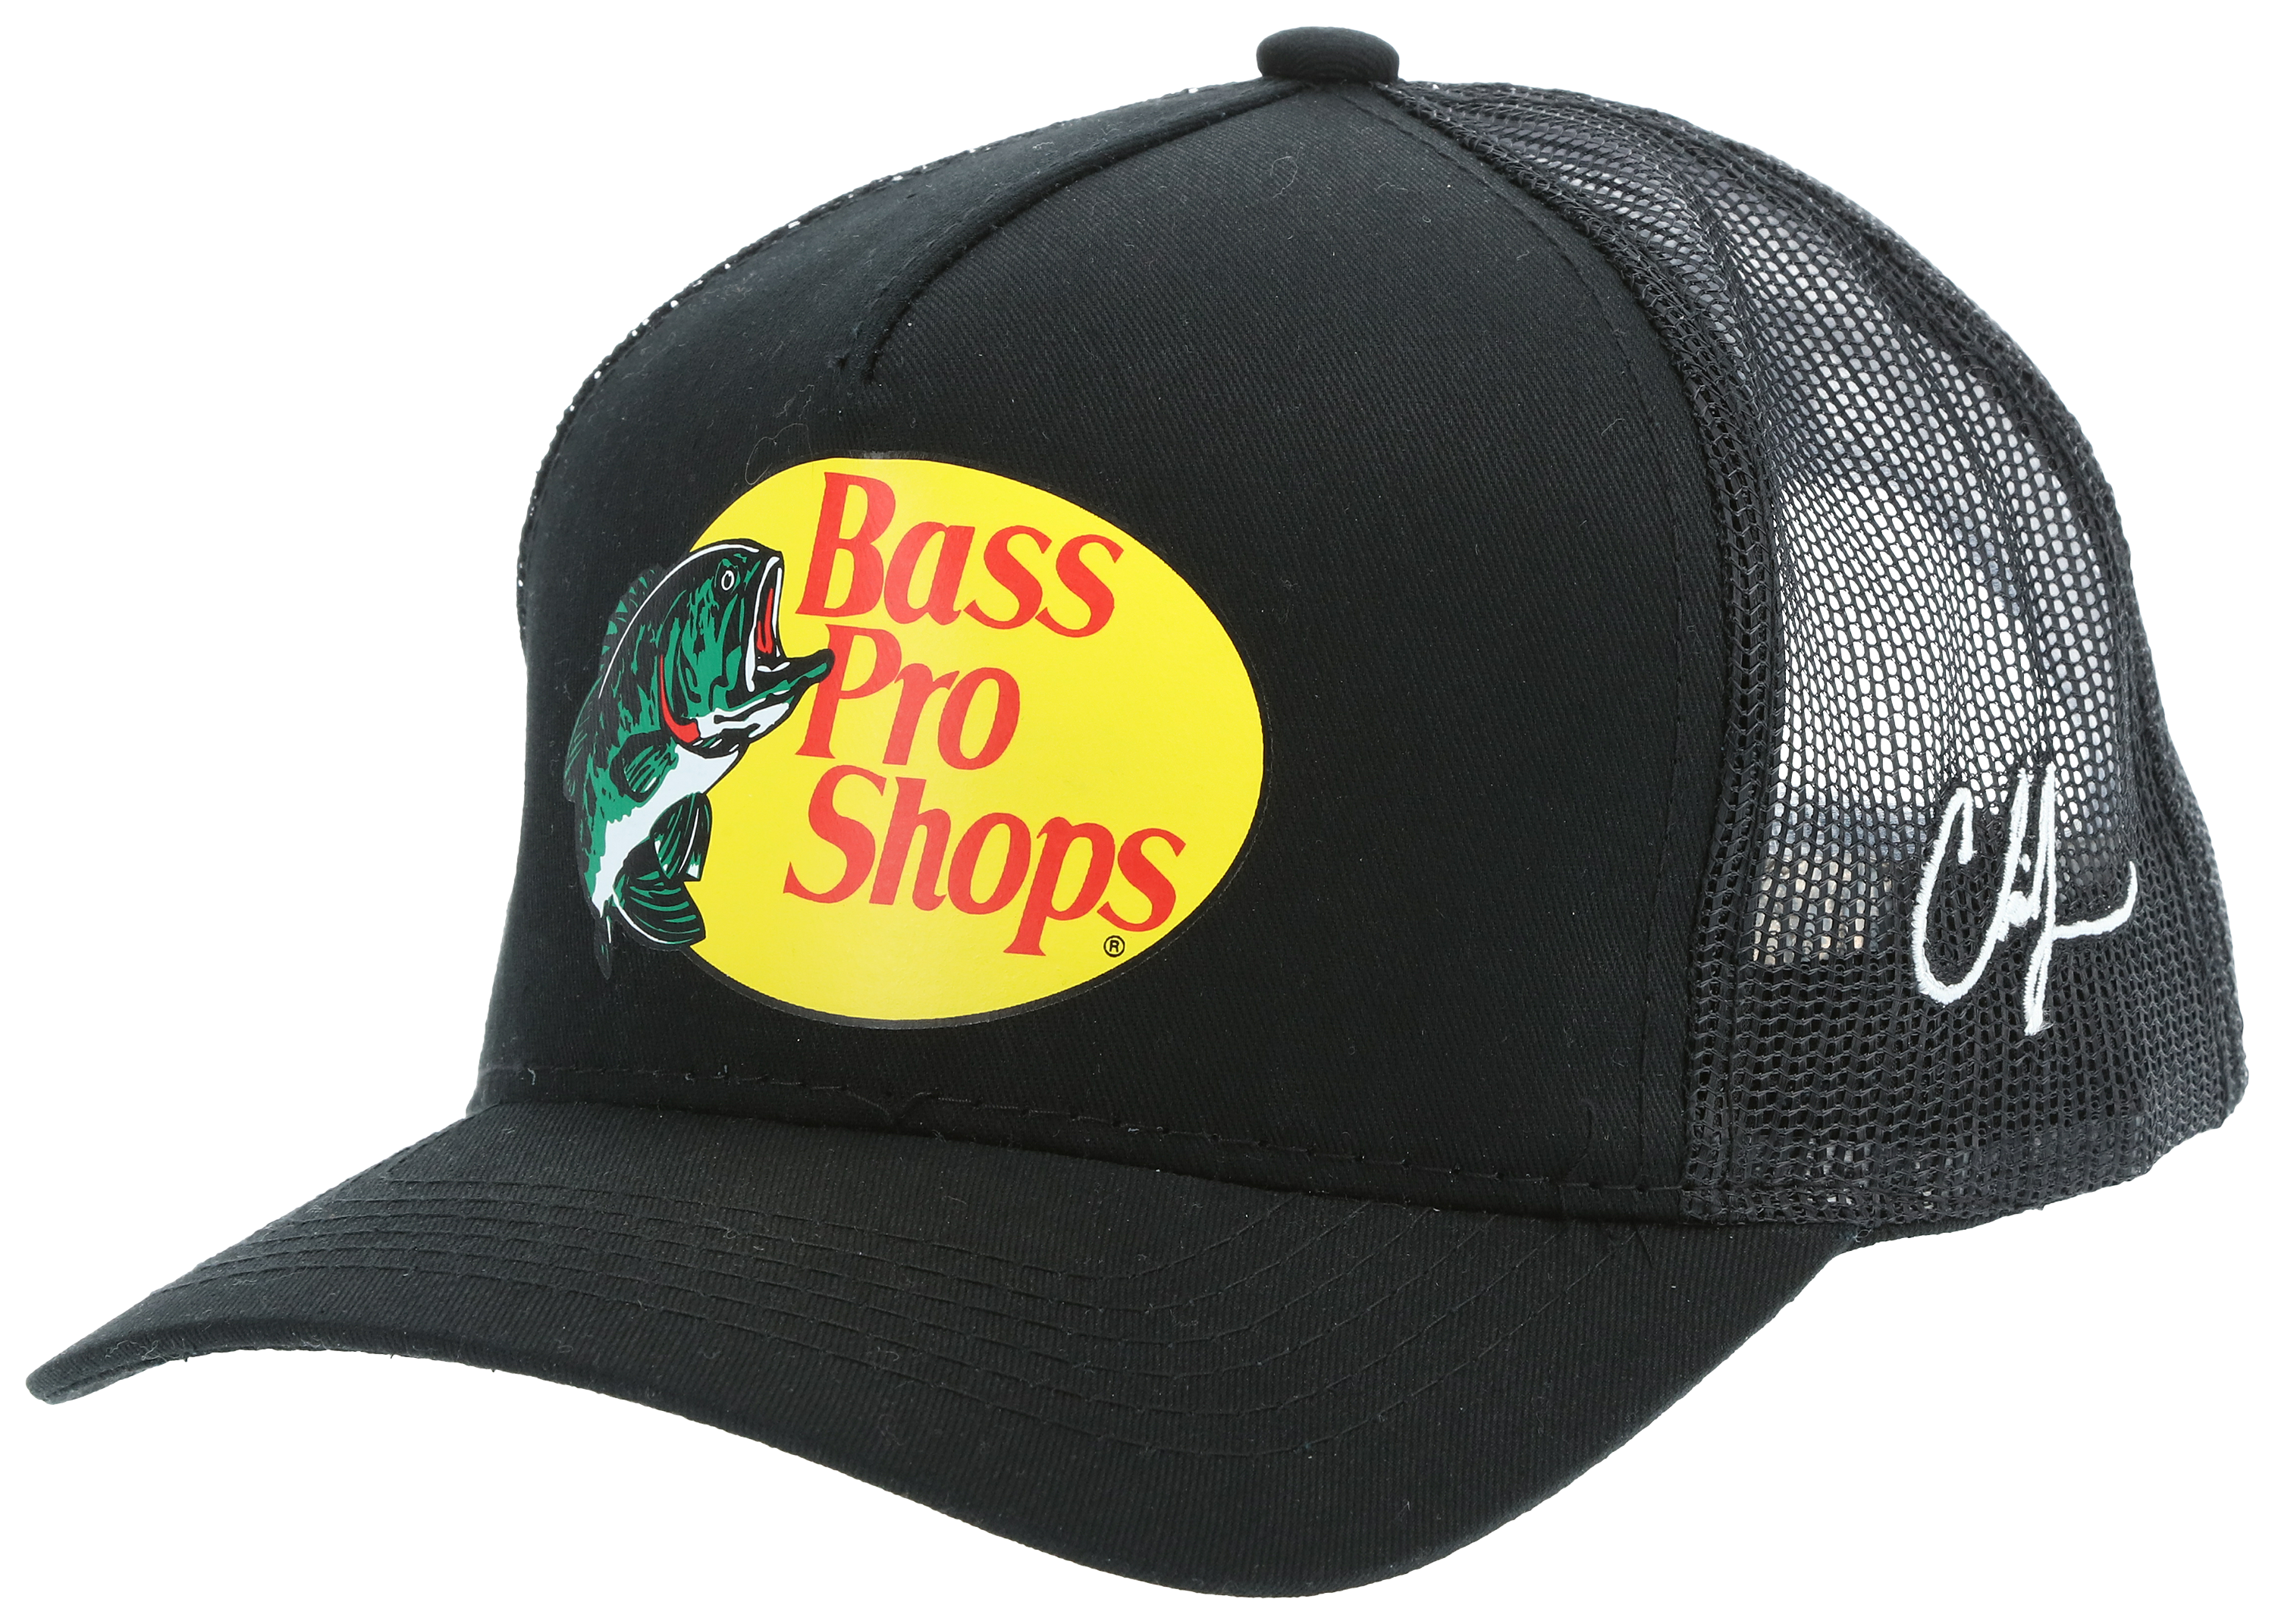 Bass Pro Shop Casquette Red Adjustable Mesh Baseball Cap for Hat Fishing Hat  Unisex 